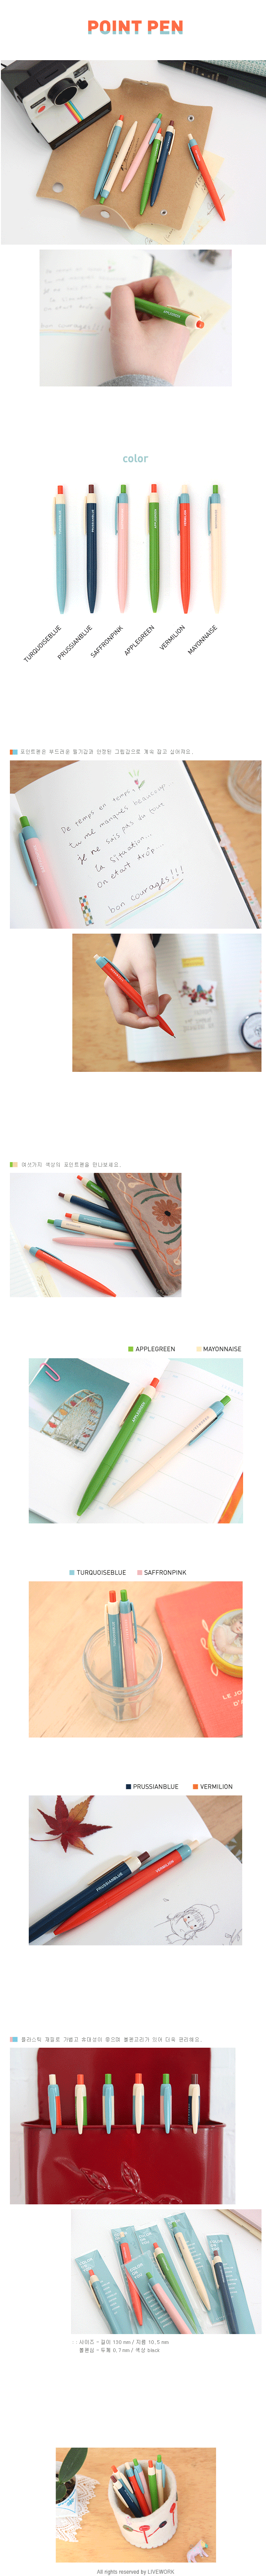 Livework's Point Pens [design stationary, cool stationary, funky stationery]